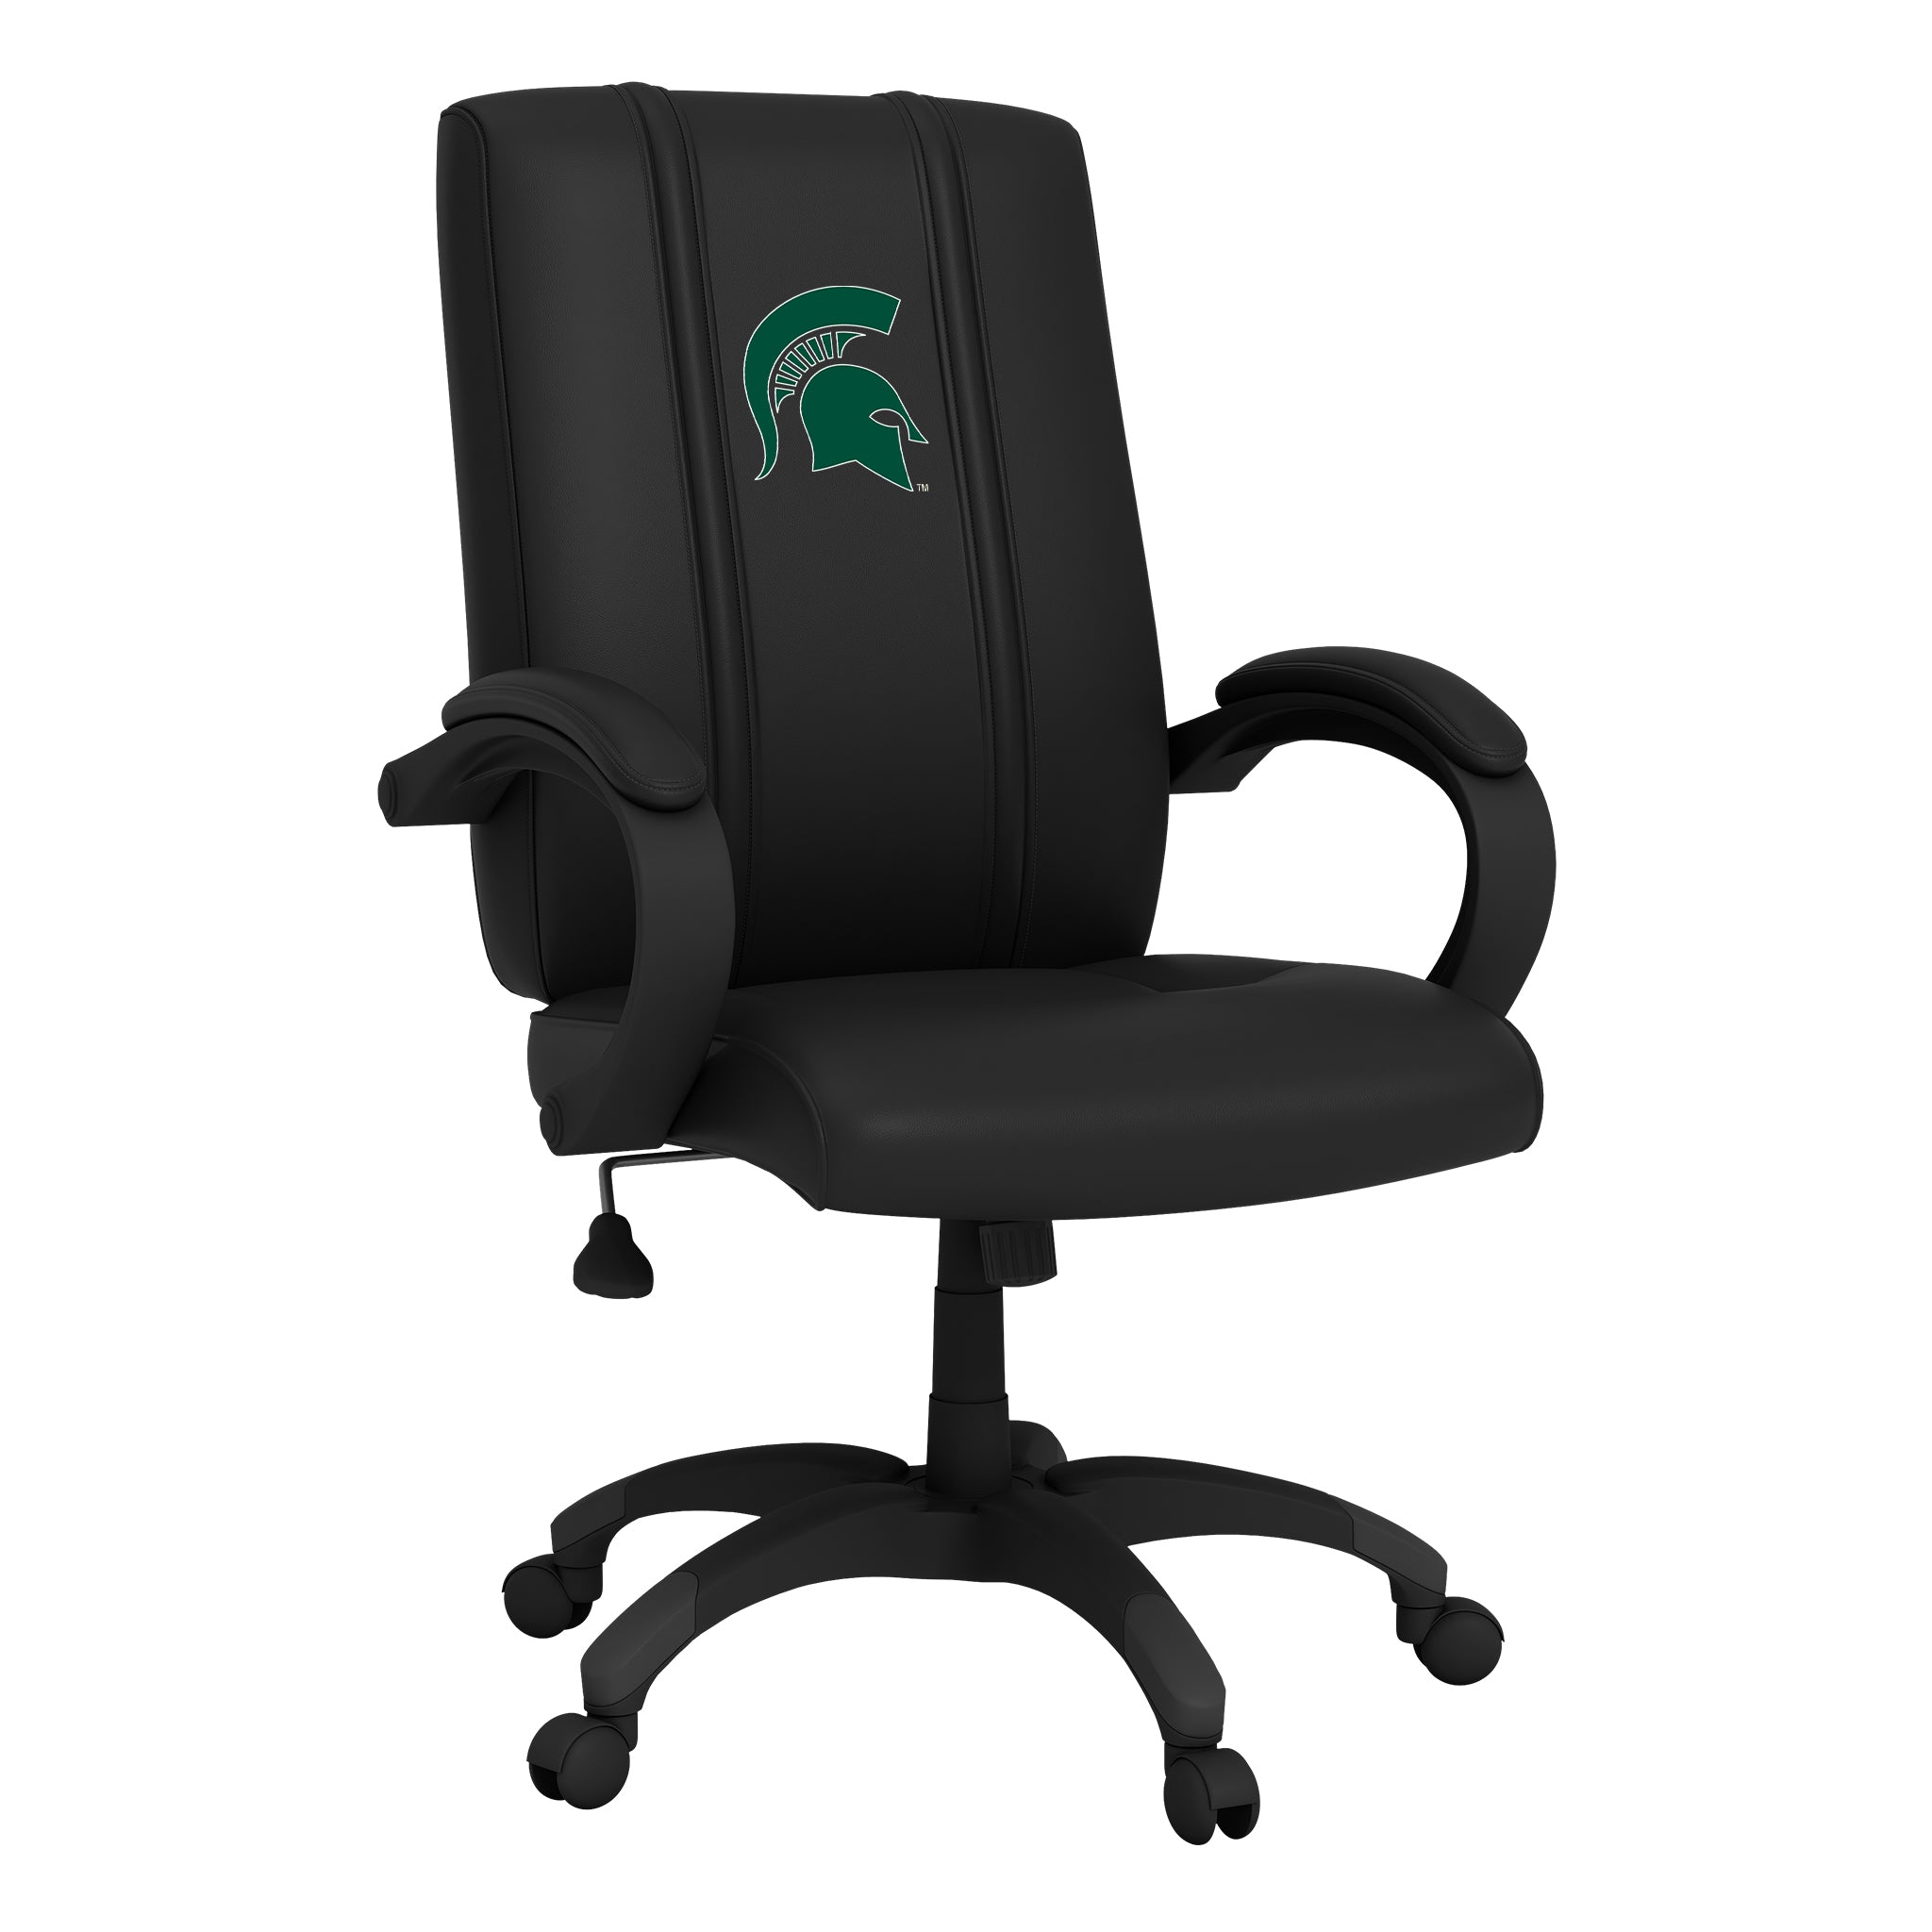 Michigan State Spartans Office Chair 1000 with Michigan State Spartans Logo